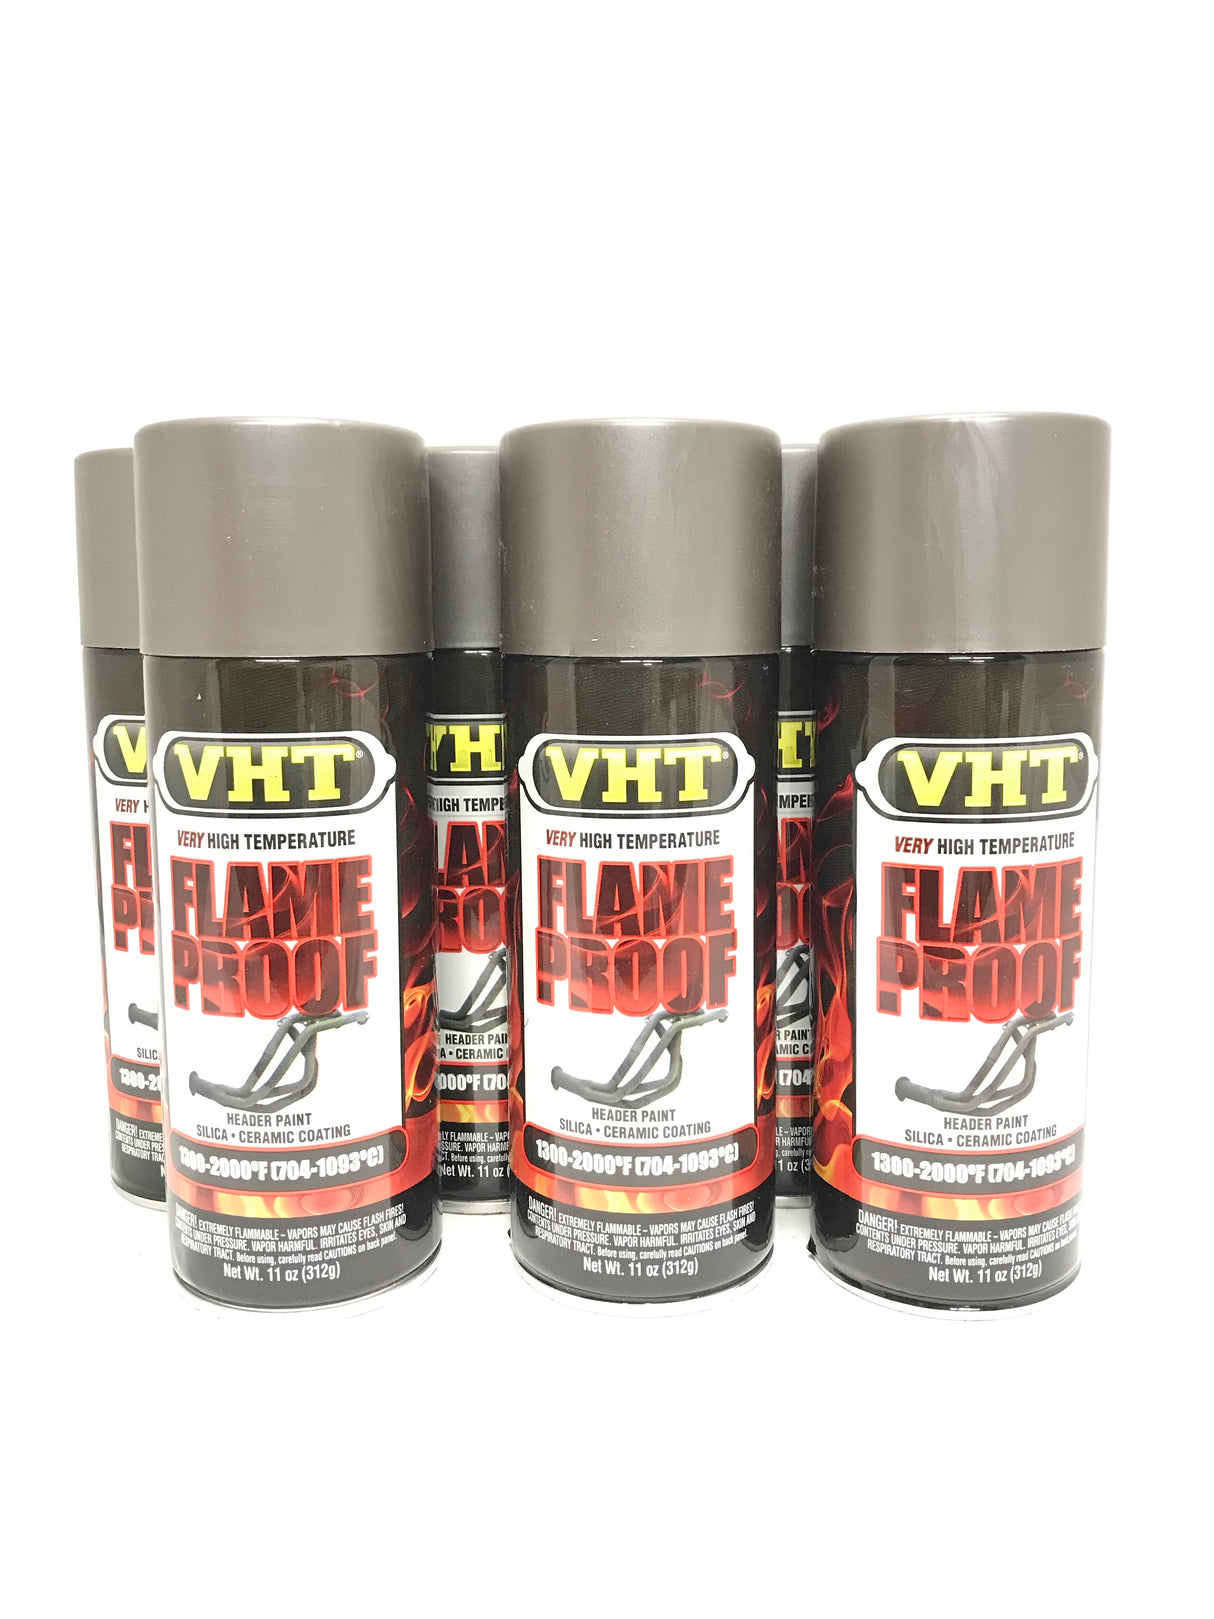 VHT SP998-6 PACK CAST IRON High Temperature Flame Proof Header Paint - 11 oz